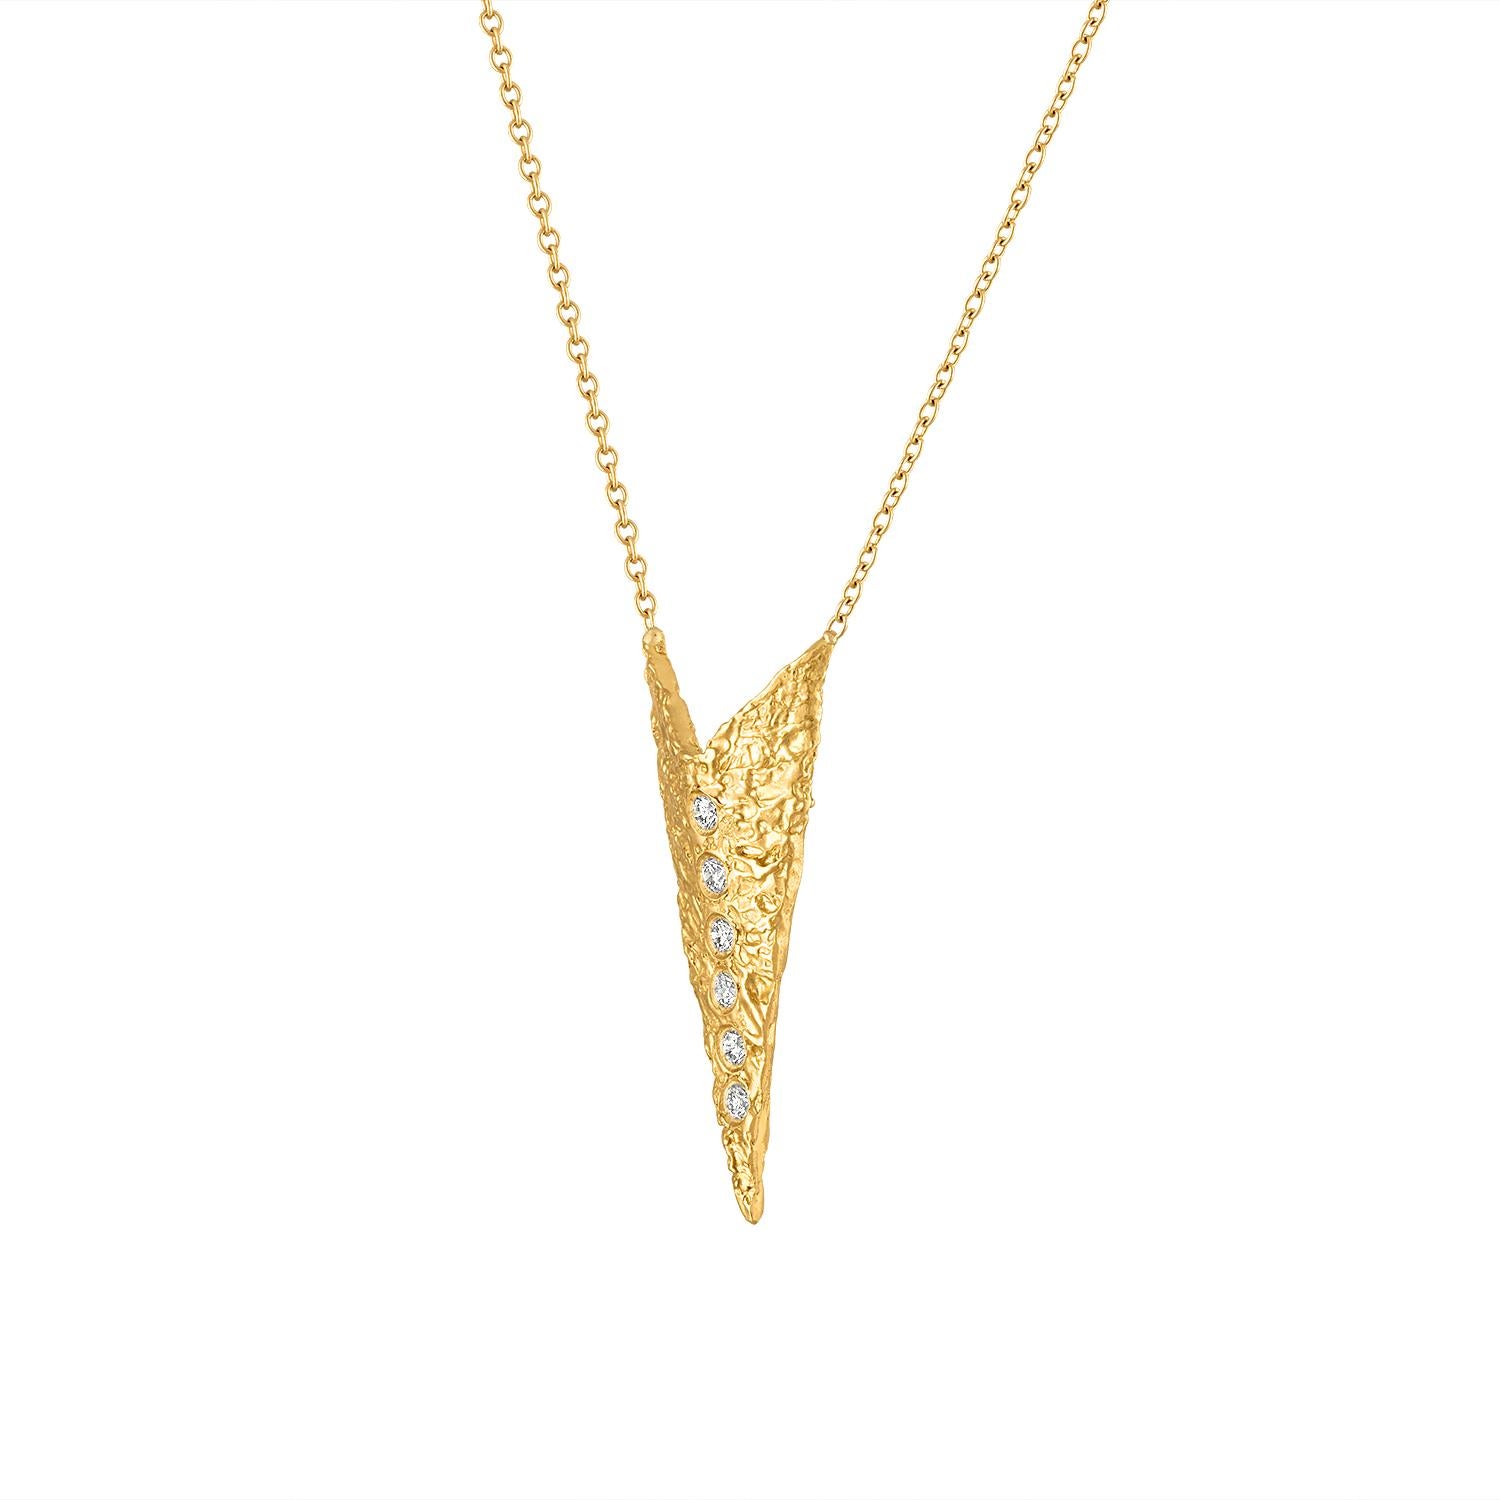 This diamond Arrowhead Necklace is a stunning piece that combines modern design with timeless elegance. The necklace features a delicate Arrowhead adorned with a sleek line of diamonds down the center creating a look that is both eye catching and